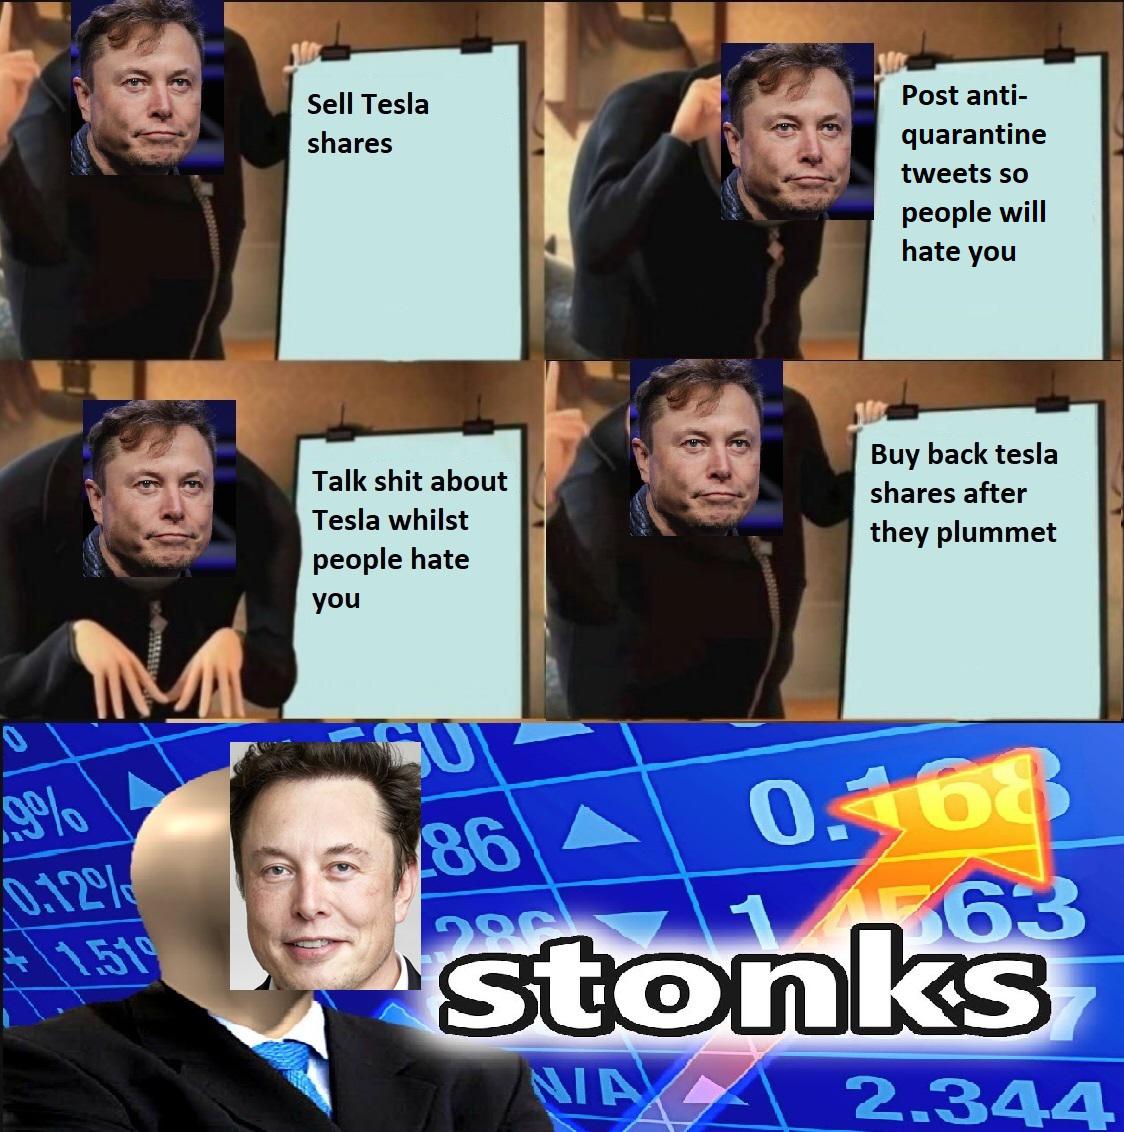 Dank, SEC, Elon Dank Memes Dank, SEC, Elon text: Sell Tesla shares Talk shit about Tesla whilst people hate you Post anti- quarantine tweets so people will hate you Buy back tesla shares after they plummet stonl«s 2 —344 